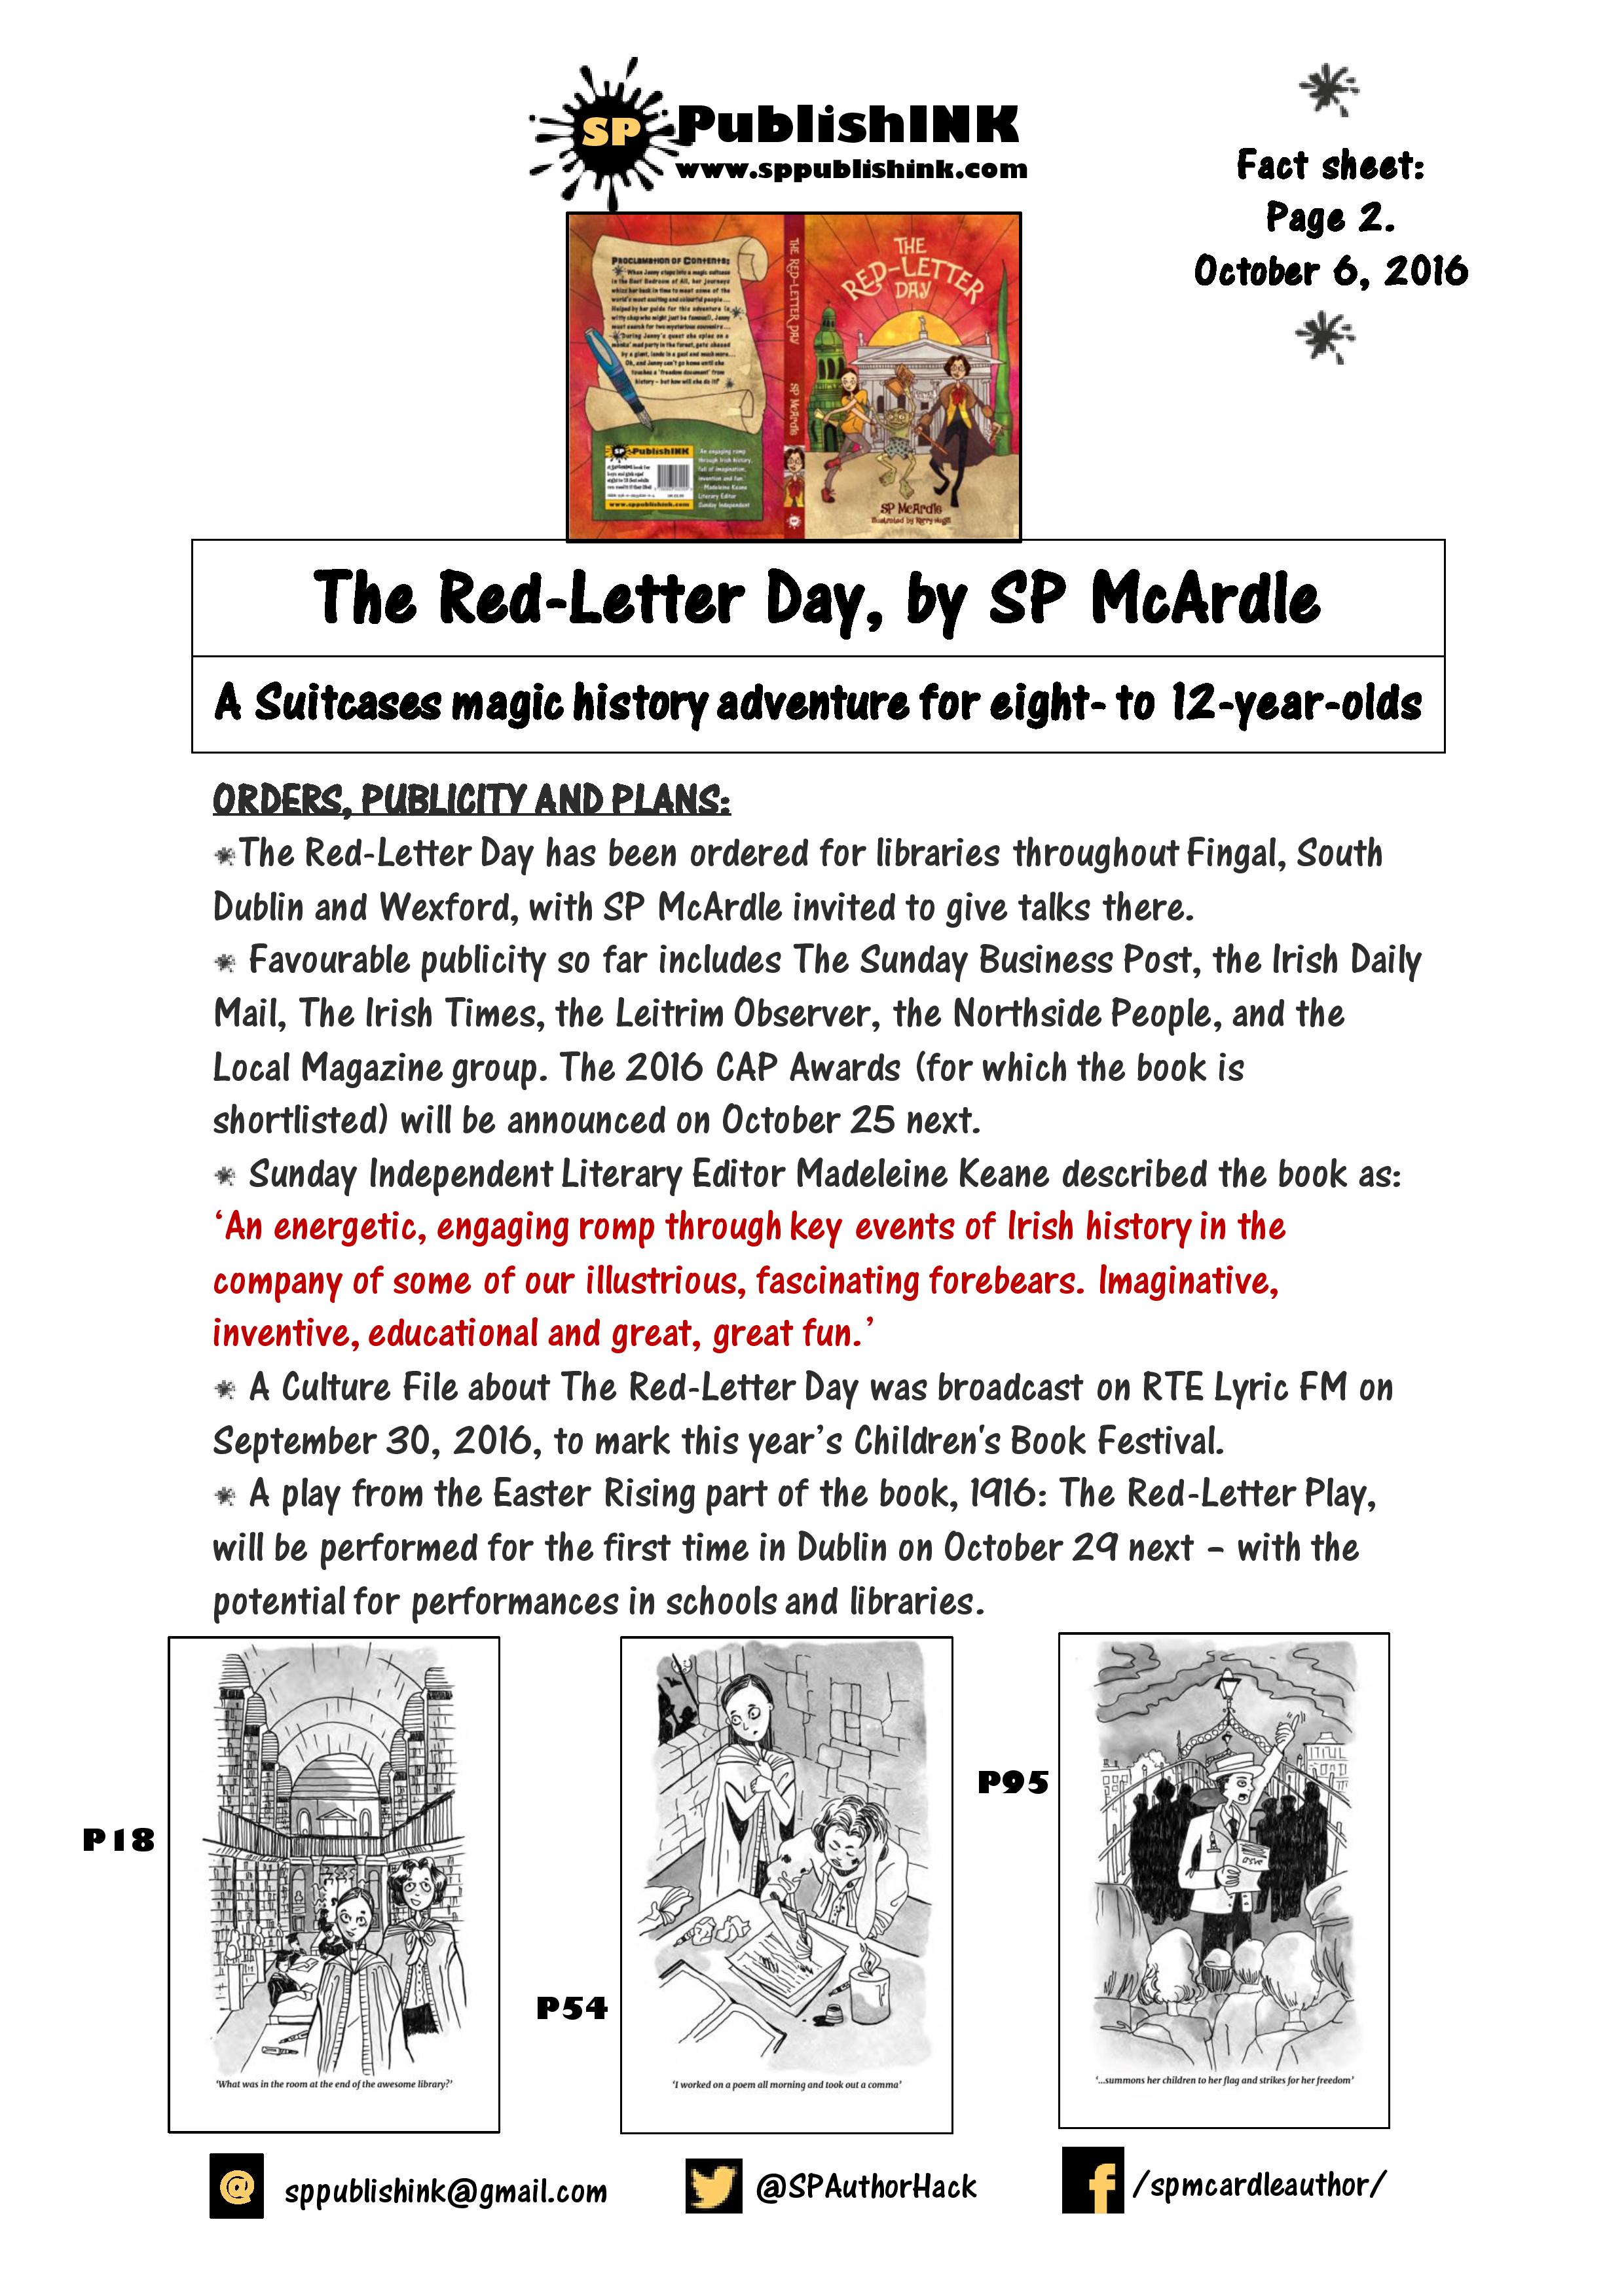 factsheet-the-red-letter-day-page-2-oct-6-2016